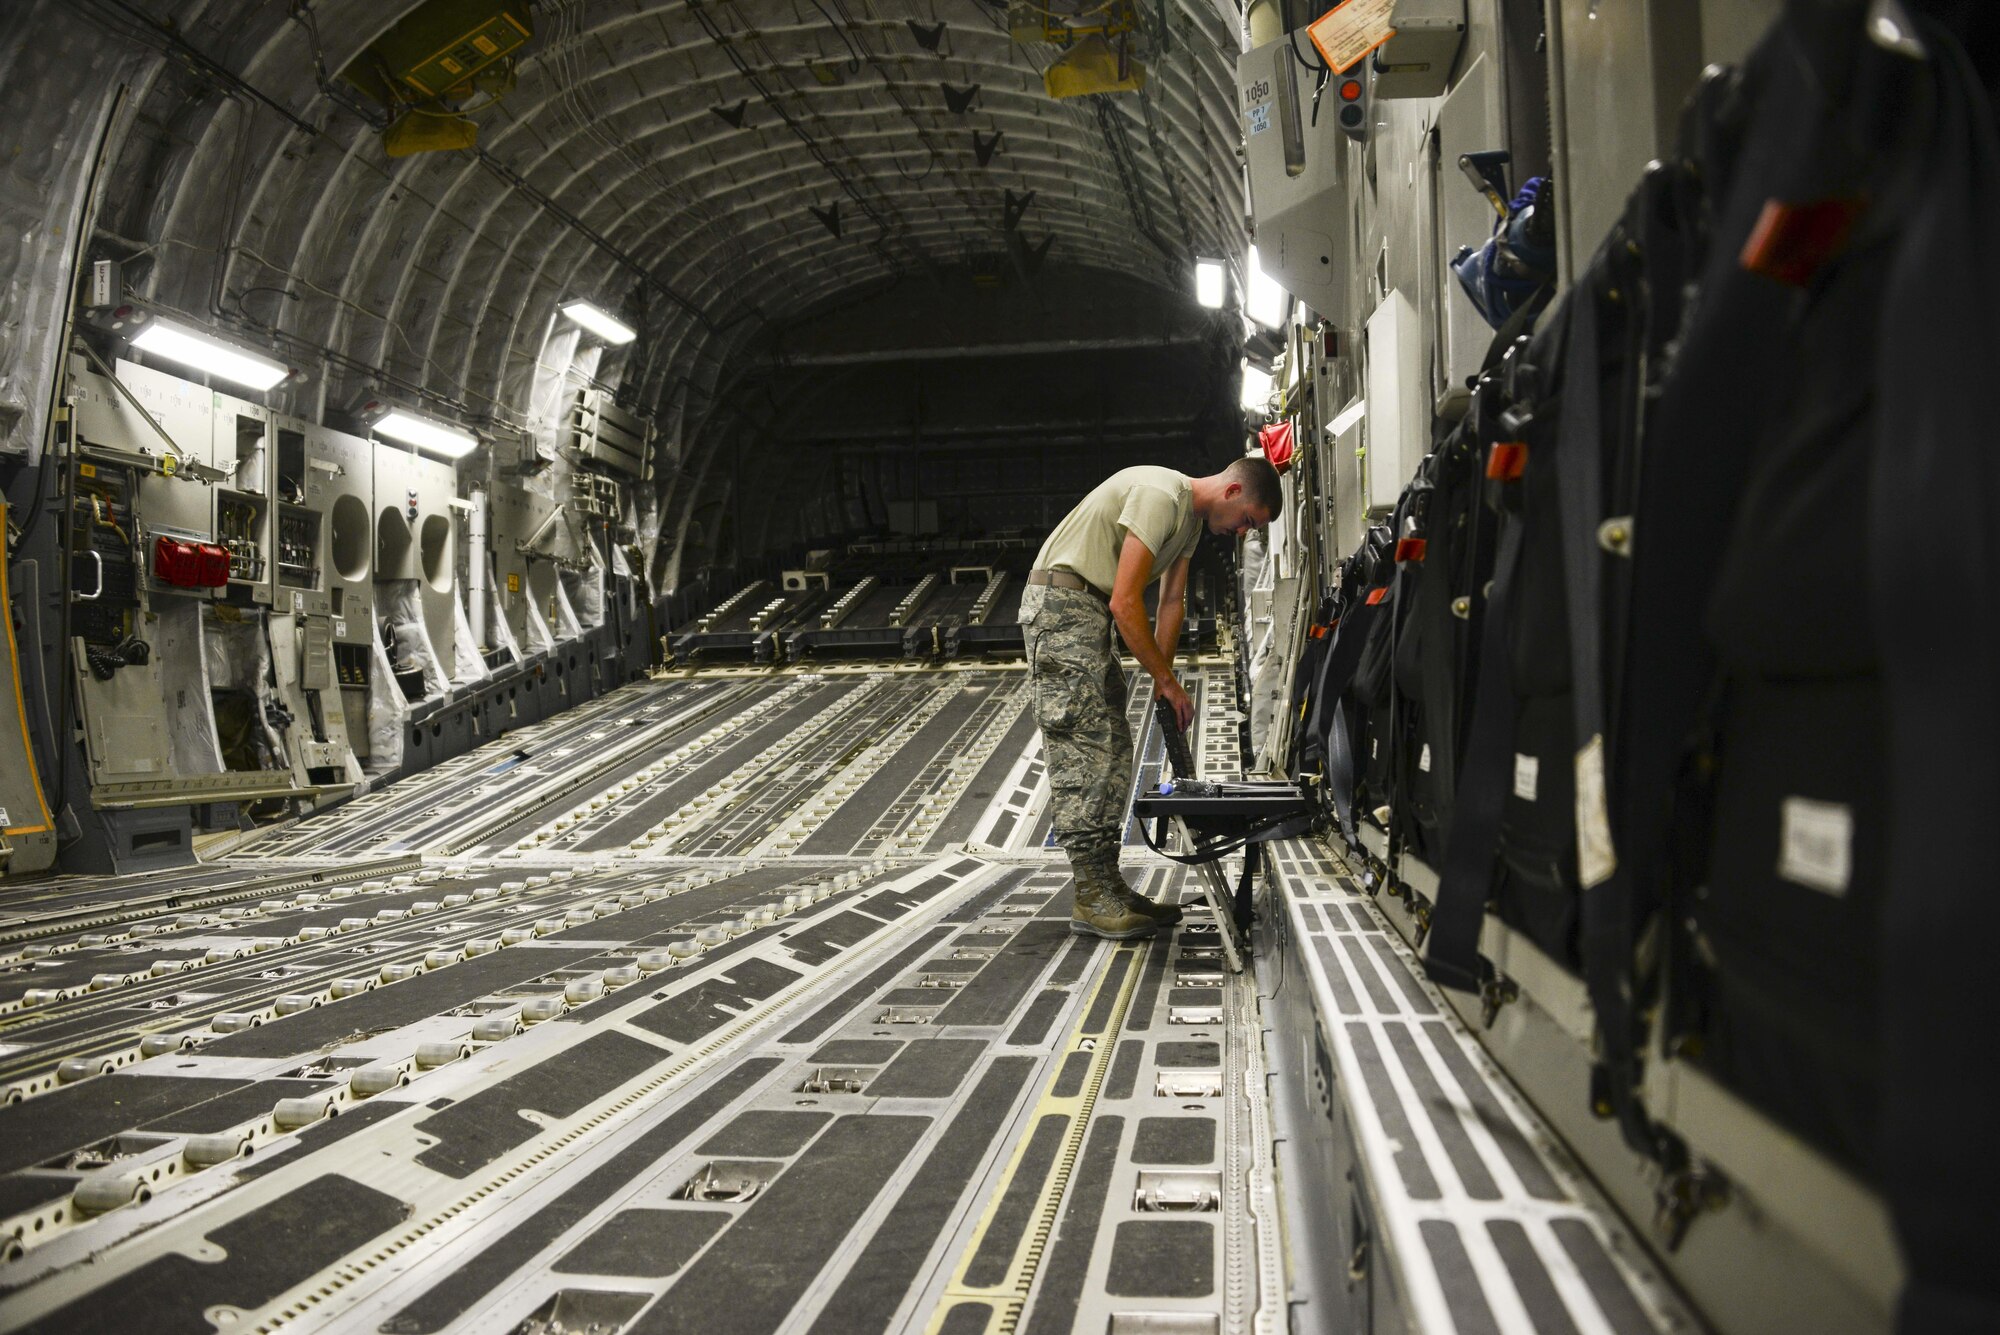 Staff Sgt. Josh Budinich, 8th Expeditionary Air Mobility Squadron, Aircraft Maintenance Flight aero repair craftsman, prepares his checklist prior to inspecting a C-17 Globemaster III June 30, 2016, at Al Udeid Air Base, Qatar. The 8th EAMS contains Aerial Port Flight and Aircraft Maintenance Flight. MXA Airmen maintain the most technically advanced cargo airlift aircraft in the world as the largest enroute unit in the U.S. Air Forces Central Command area of responsibility. They refuel and launch C-17s, C-5 Galaxies and Boeing 777, 767 and 747 aircraft. (U.S. Air Force photo/Senior Airman Janelle Patiño/Released)